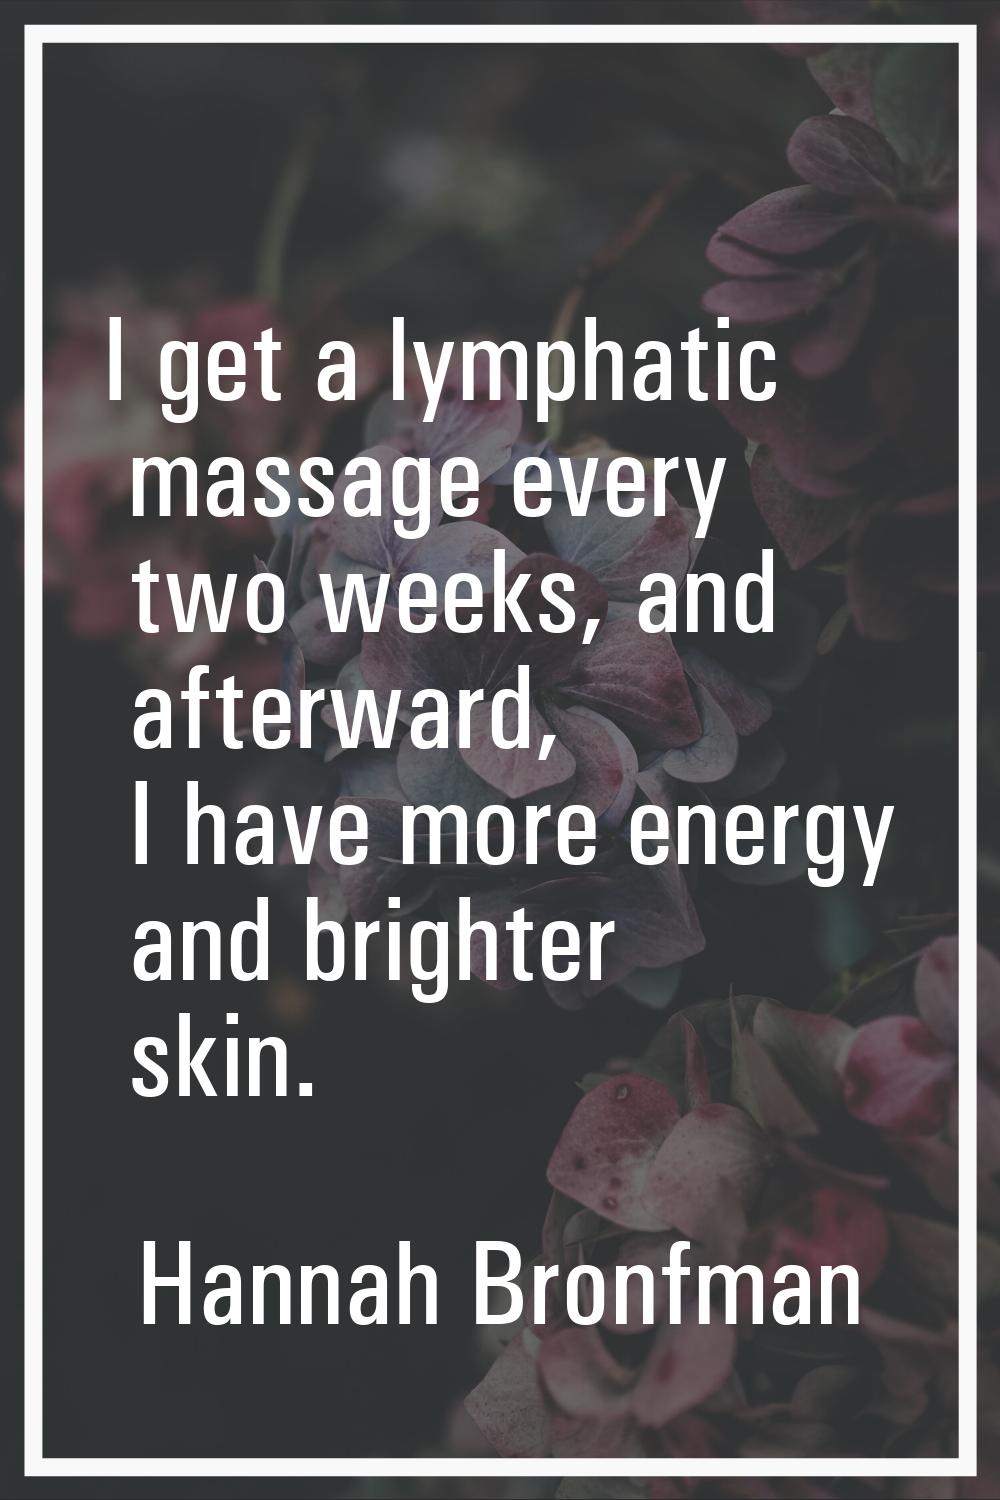 I get a lymphatic massage every two weeks, and afterward, I have more energy and brighter skin.